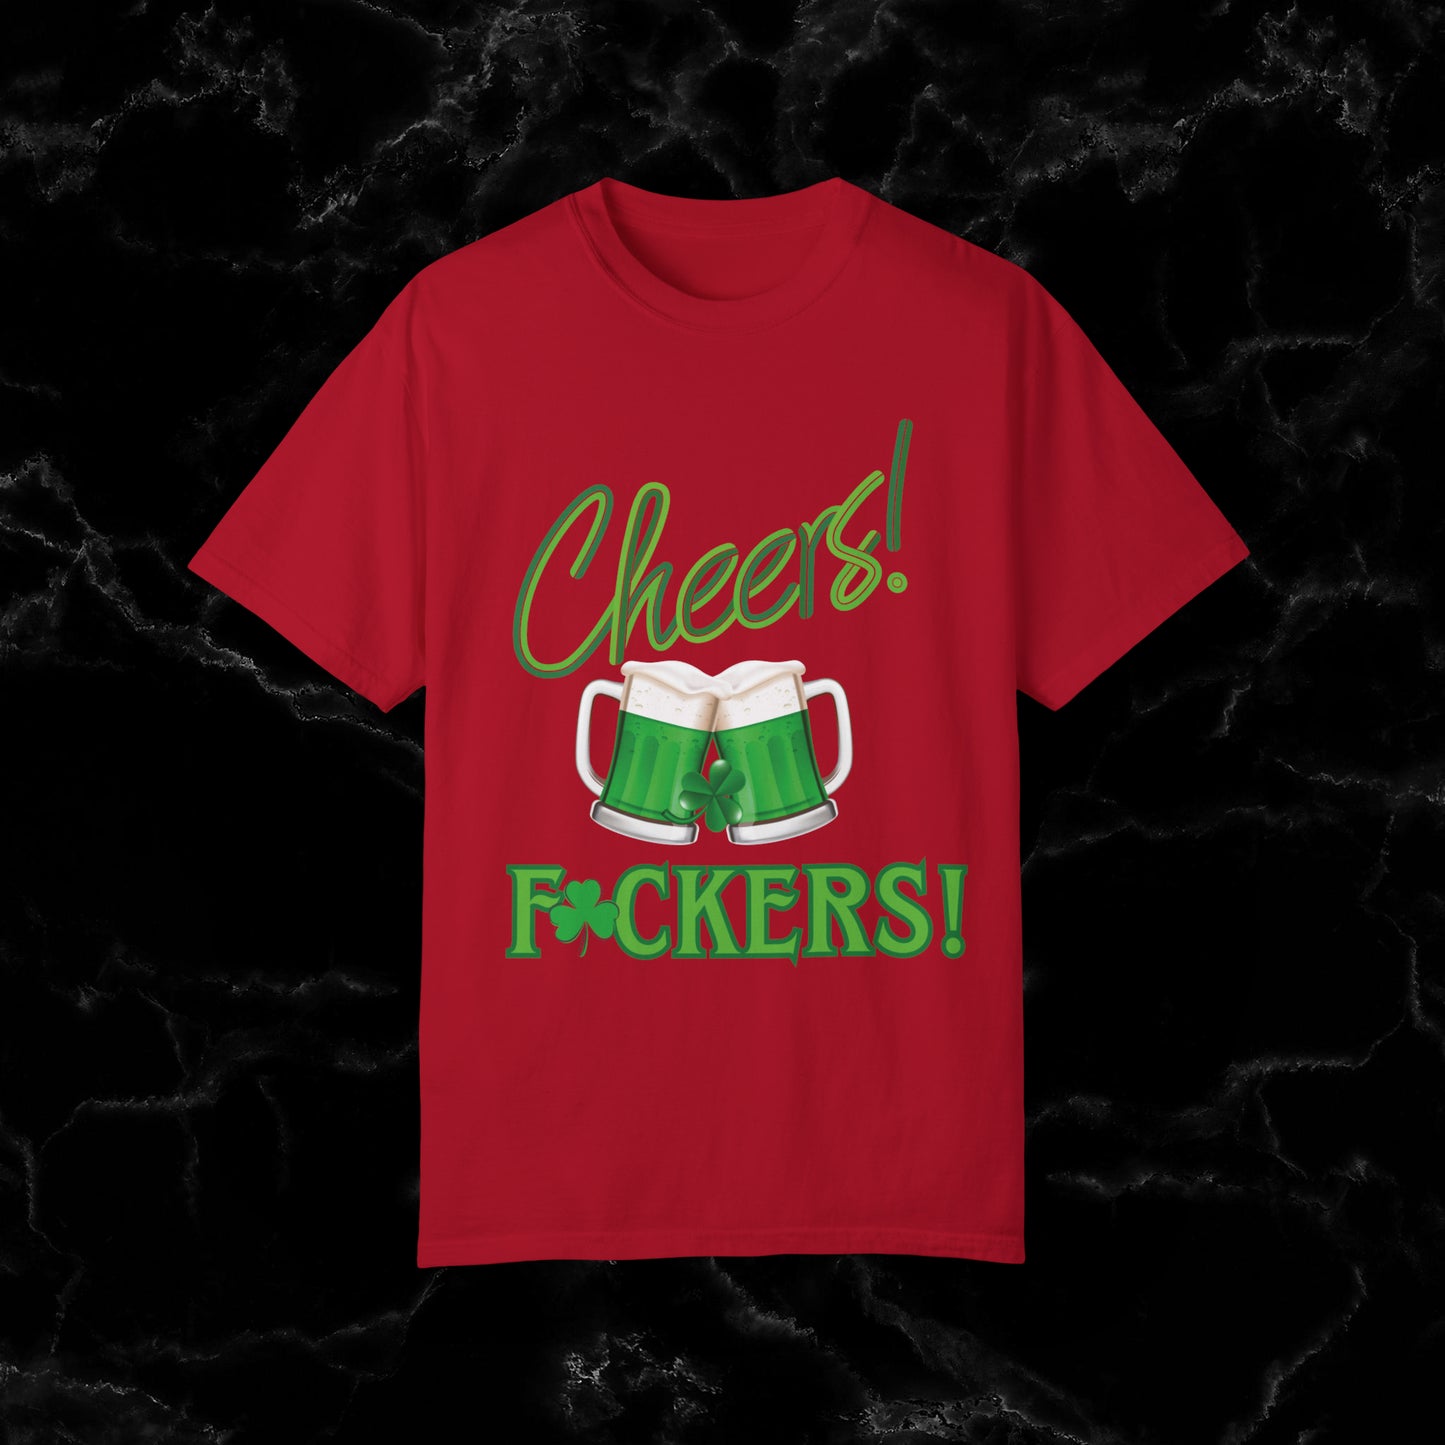 Cheers F**kers Shirt - A Bold Shamrock Statement for Irish Spirits and Good Times T-Shirt Red S 